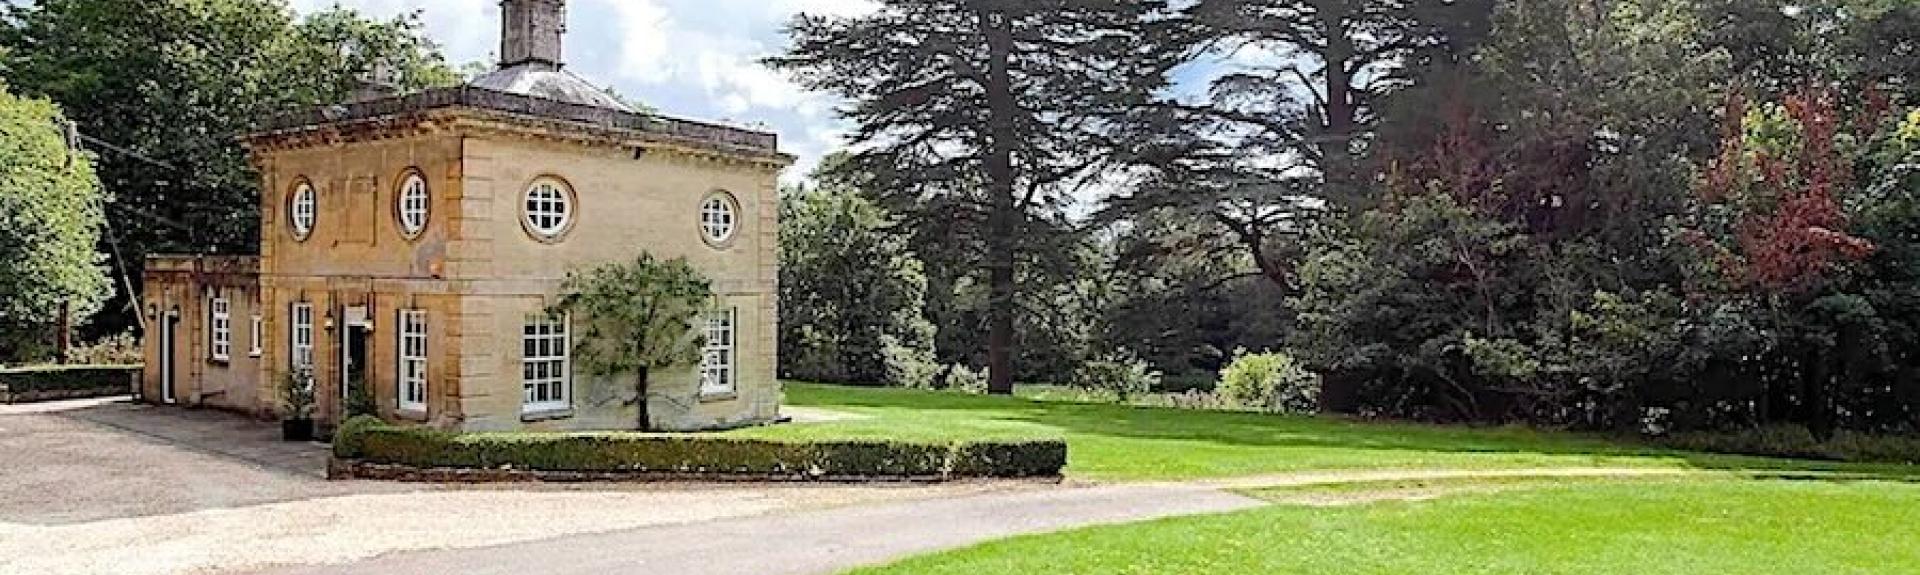 Exterior of a stone-built Cotswold country house surrounded by trees and parkland.